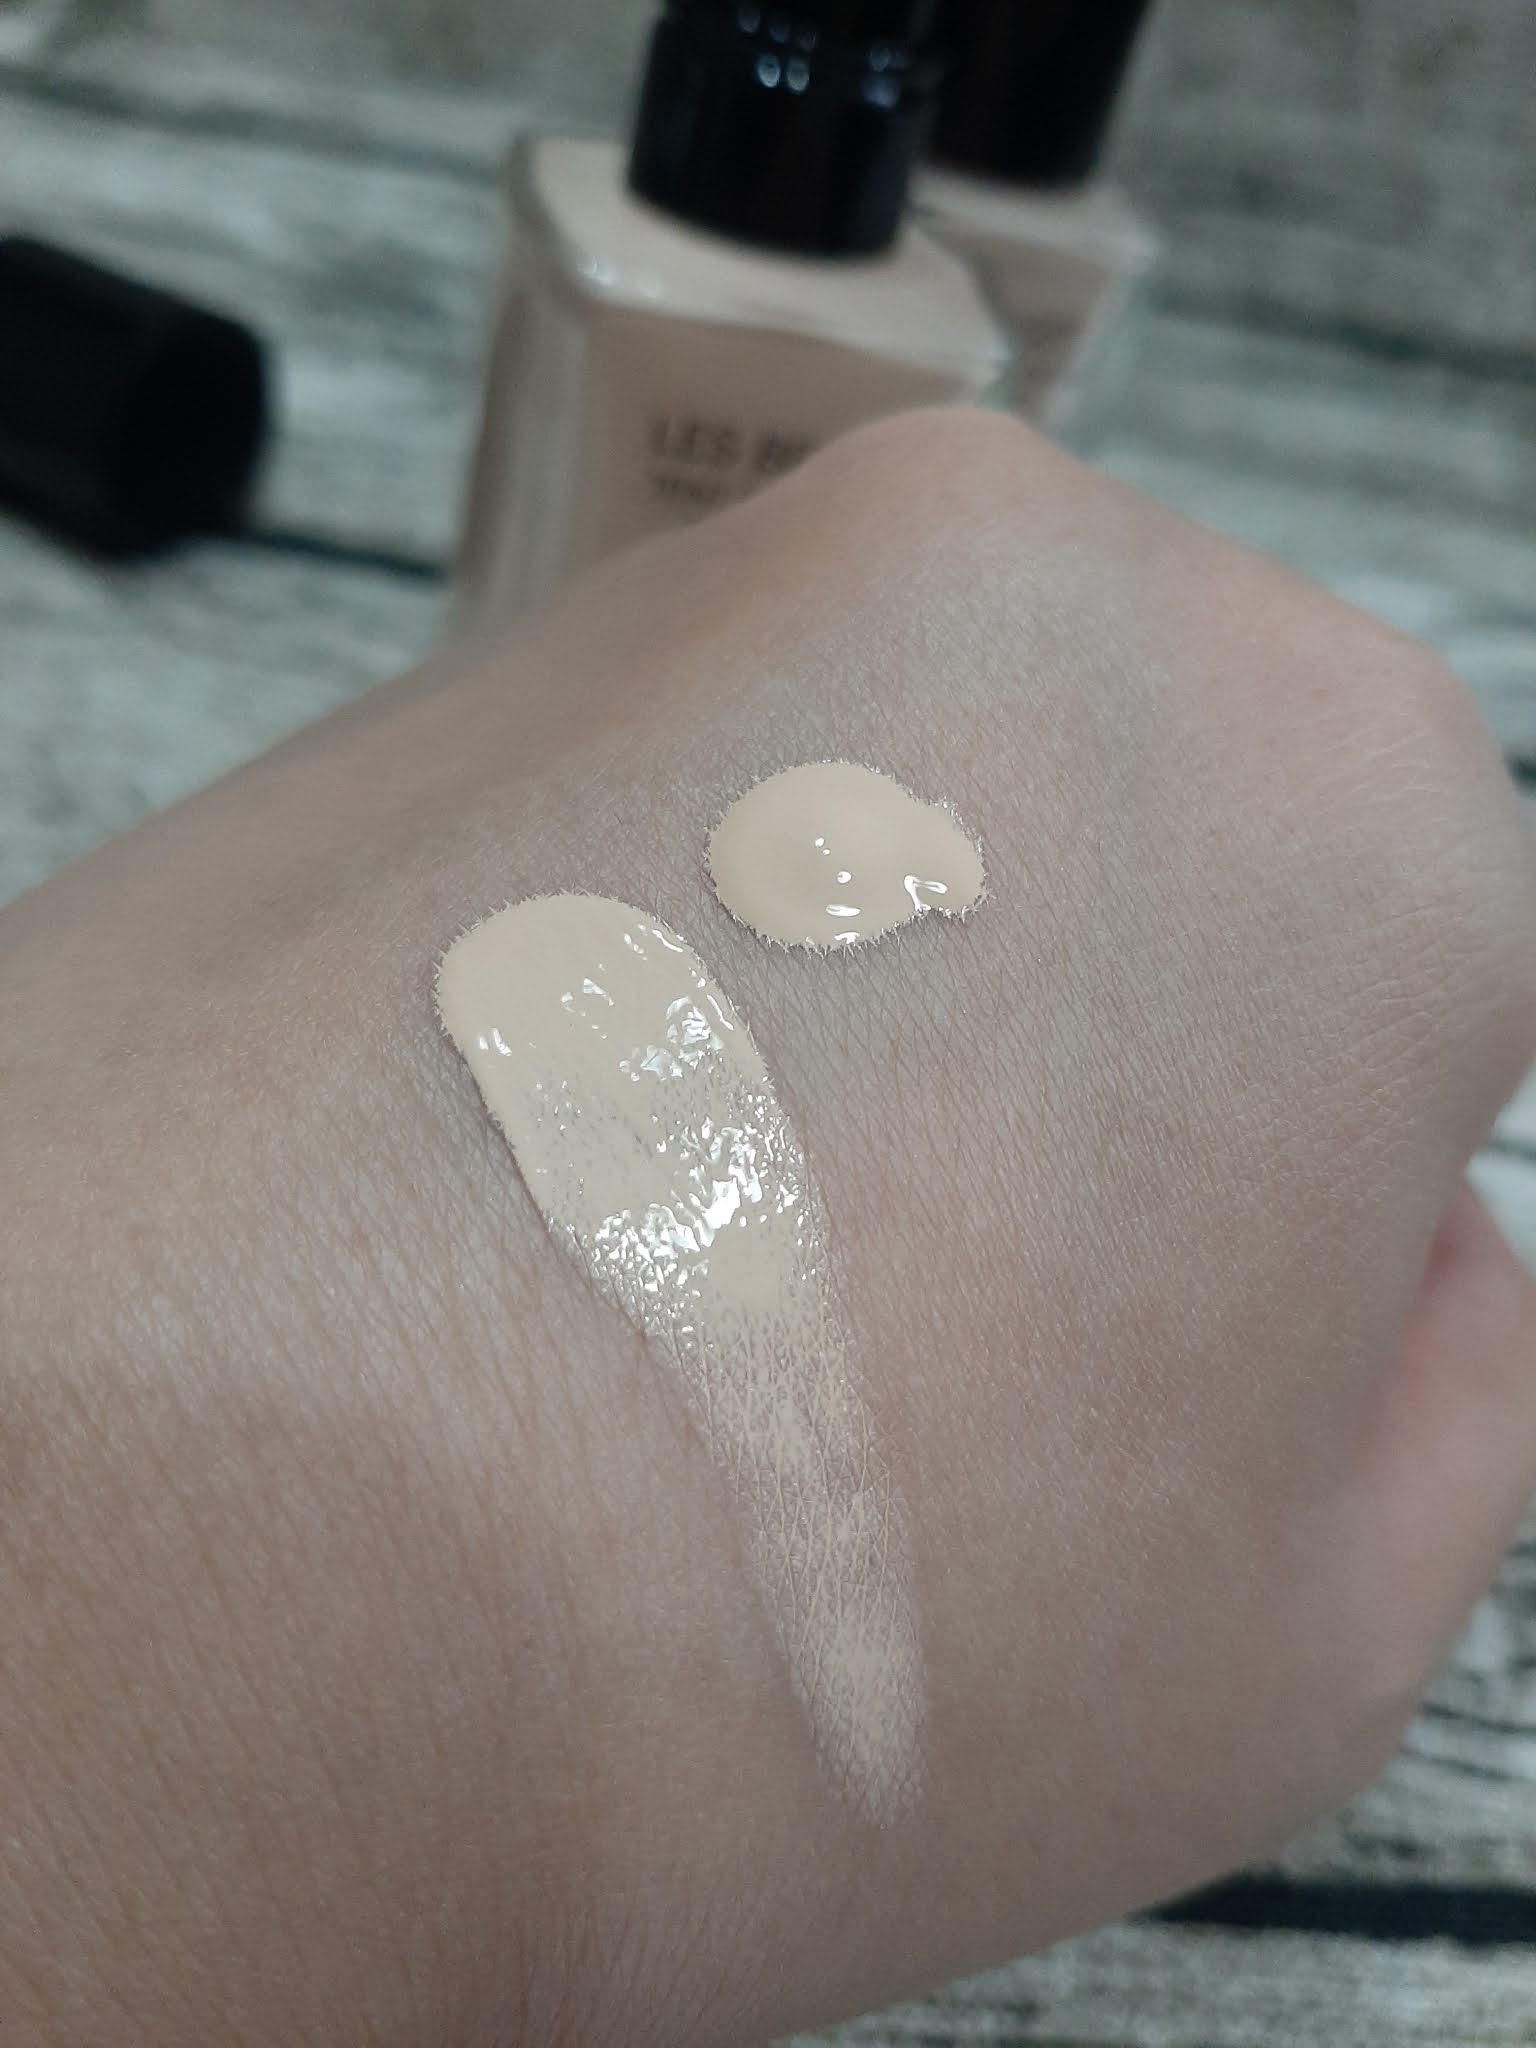 All About That Base: Chanel Les Beiges Healthy Glow Foundation Hydration  and Longwear BD11